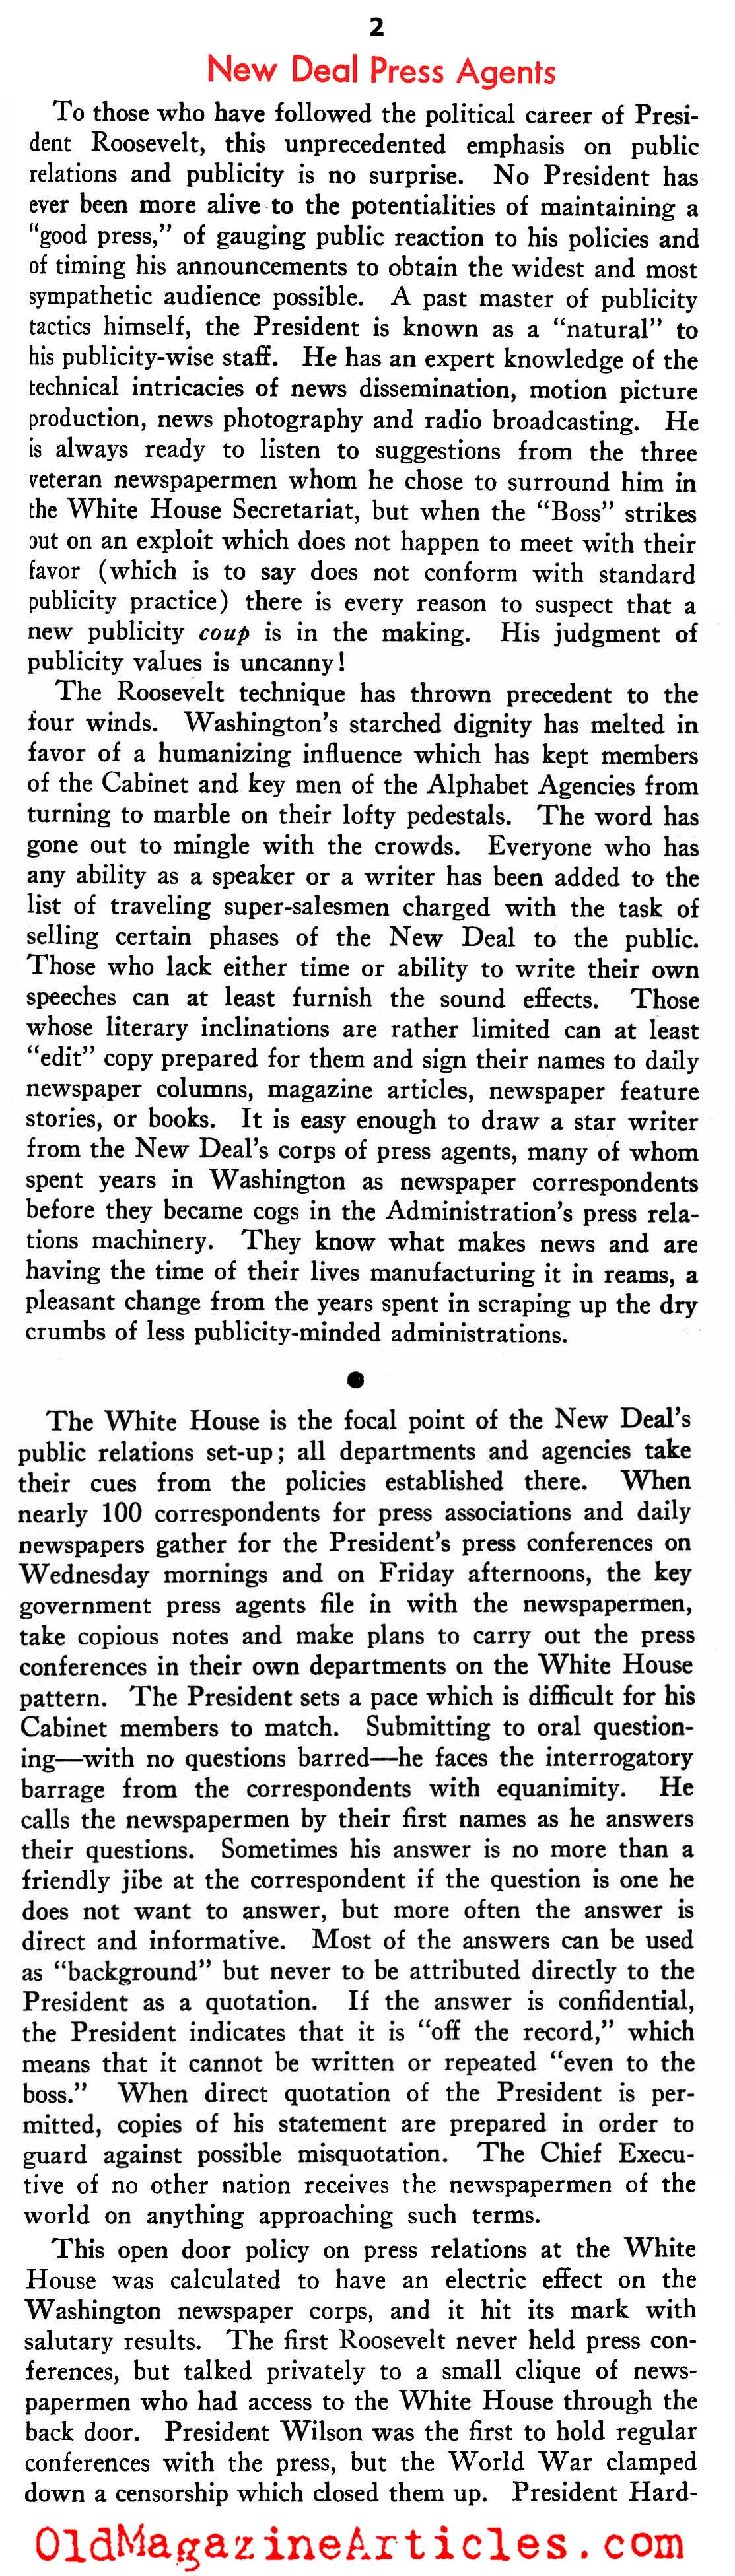 FDR's Publicity Machine (New Outlook Magazine, 1934)